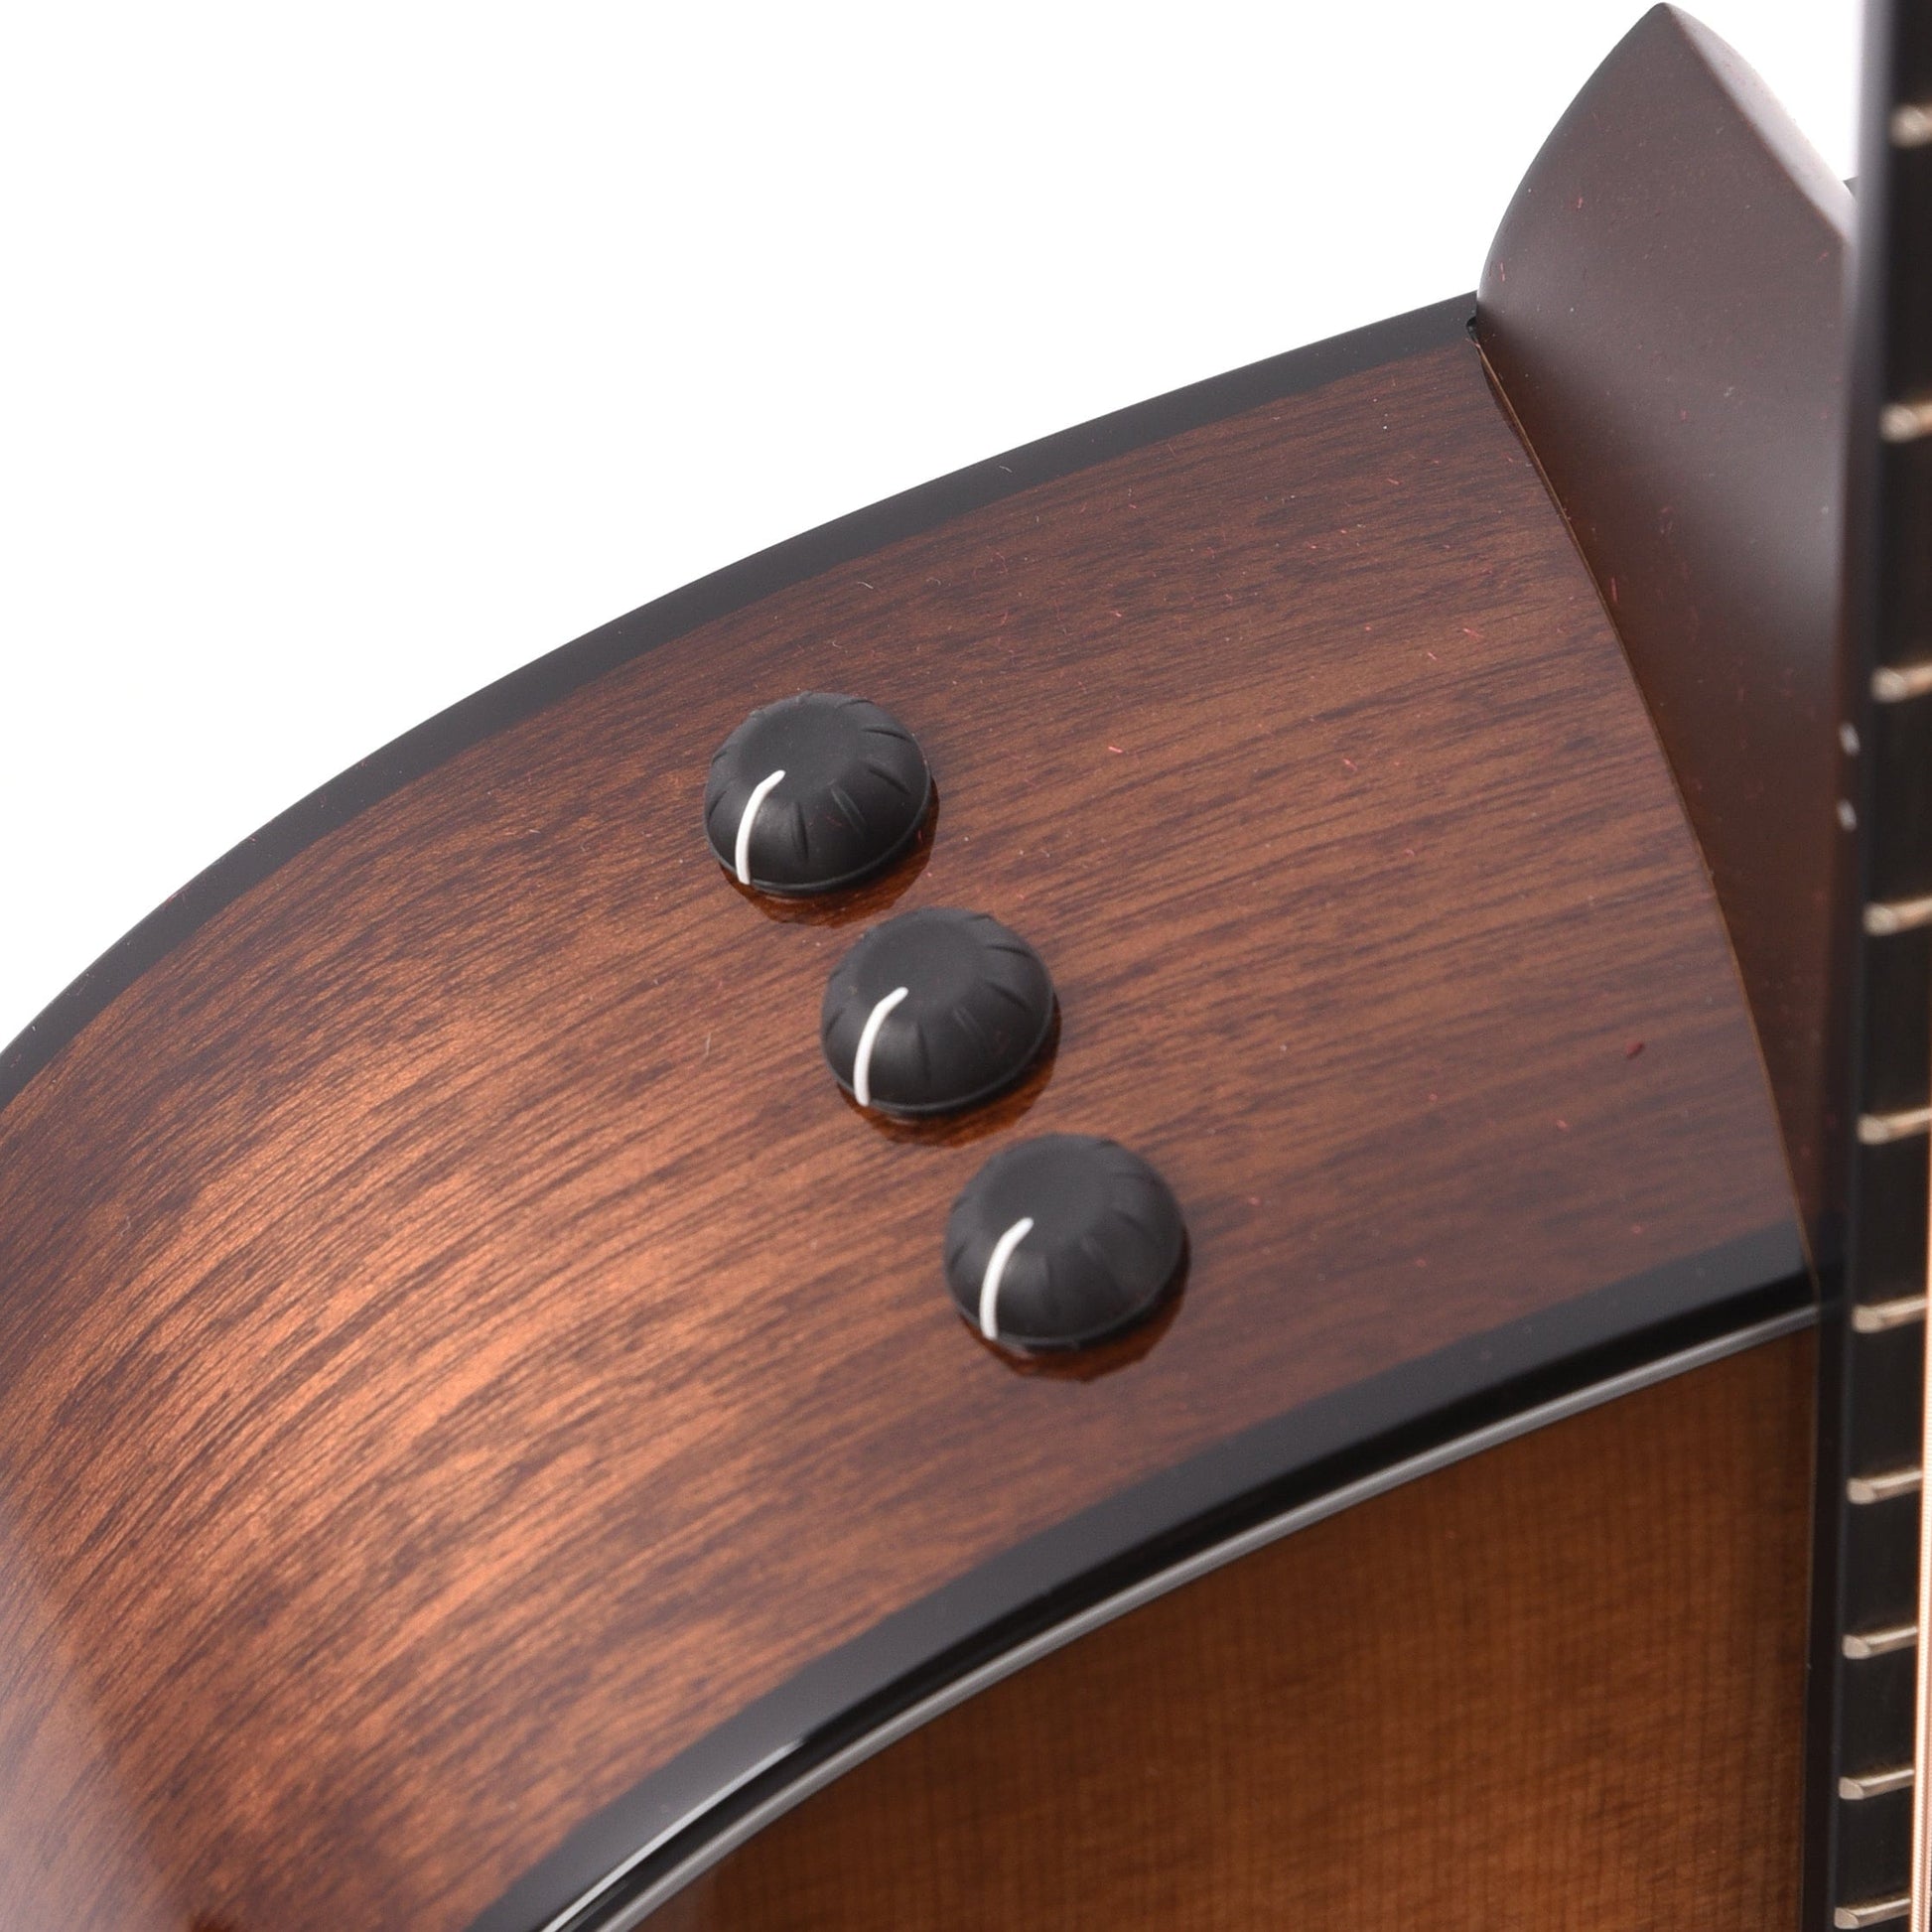 Taylor Limited 50th Anniversary 314ce Grand Auditorium Spruce/Sapele Shaded Edgeburst Acoustic Guitars / OM and Auditorium